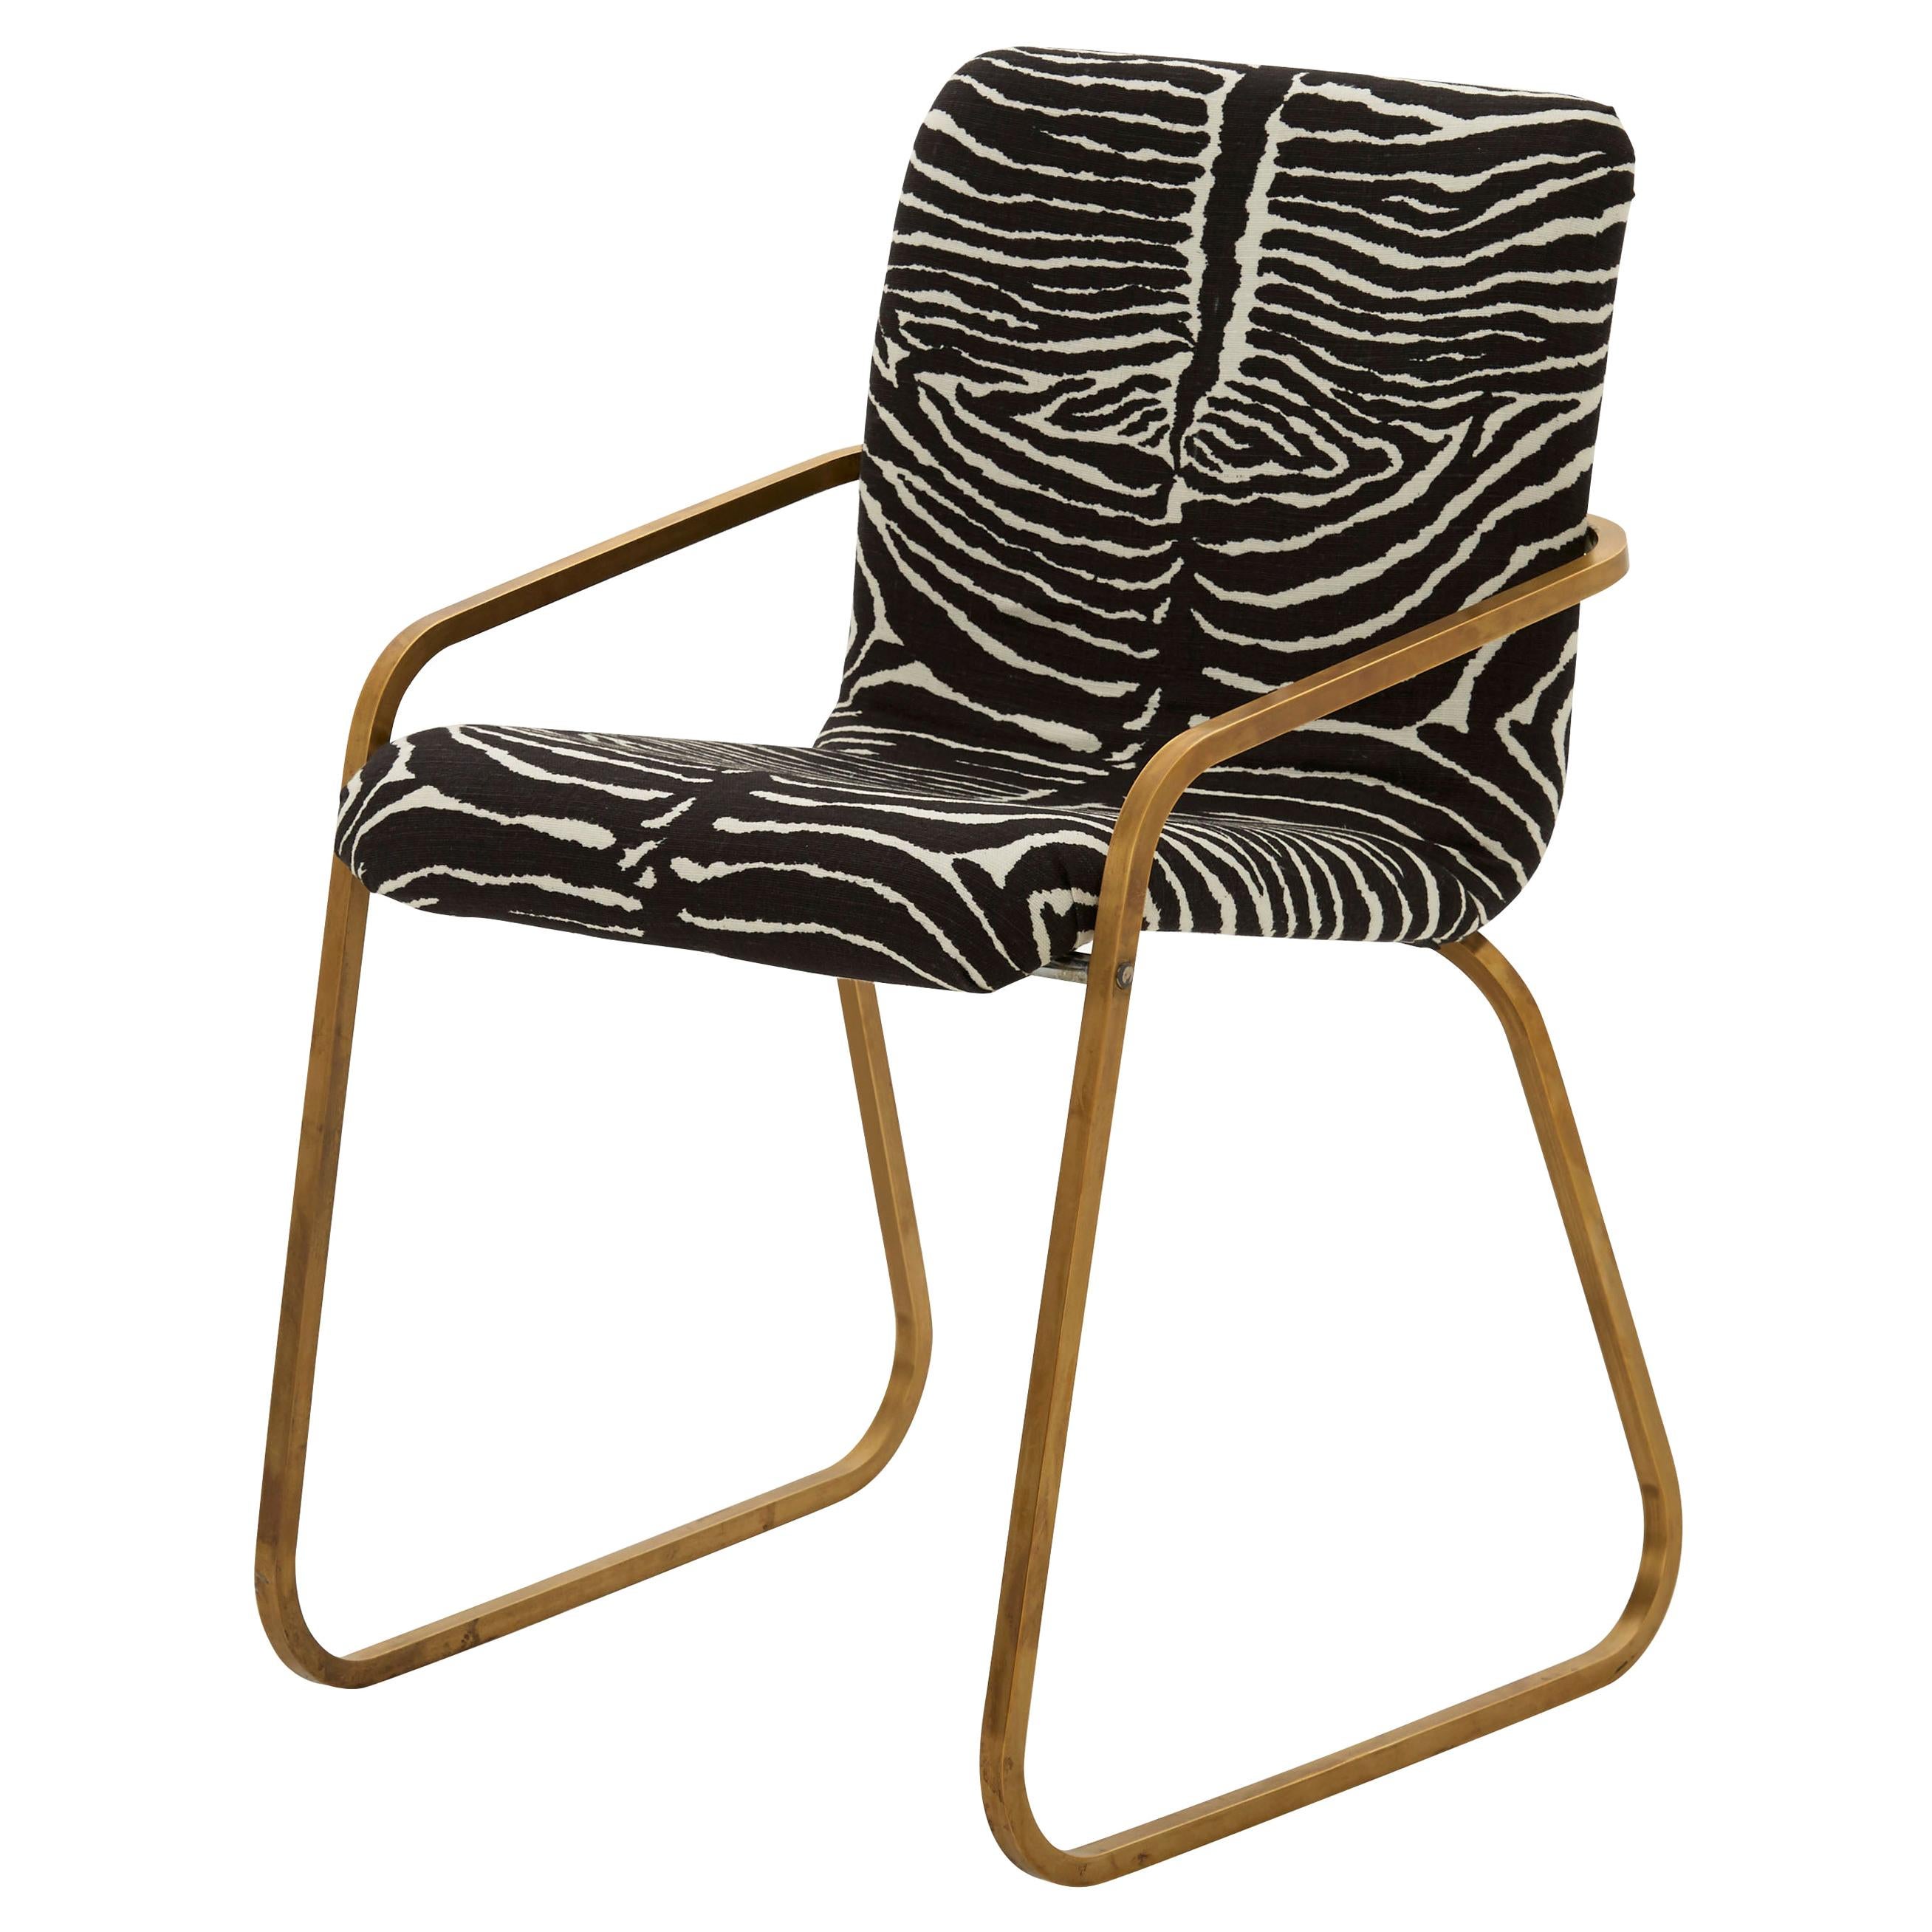 Midcentury Brass Willy Rizzo Dining Chair Upholstered in Zebra Print Linen